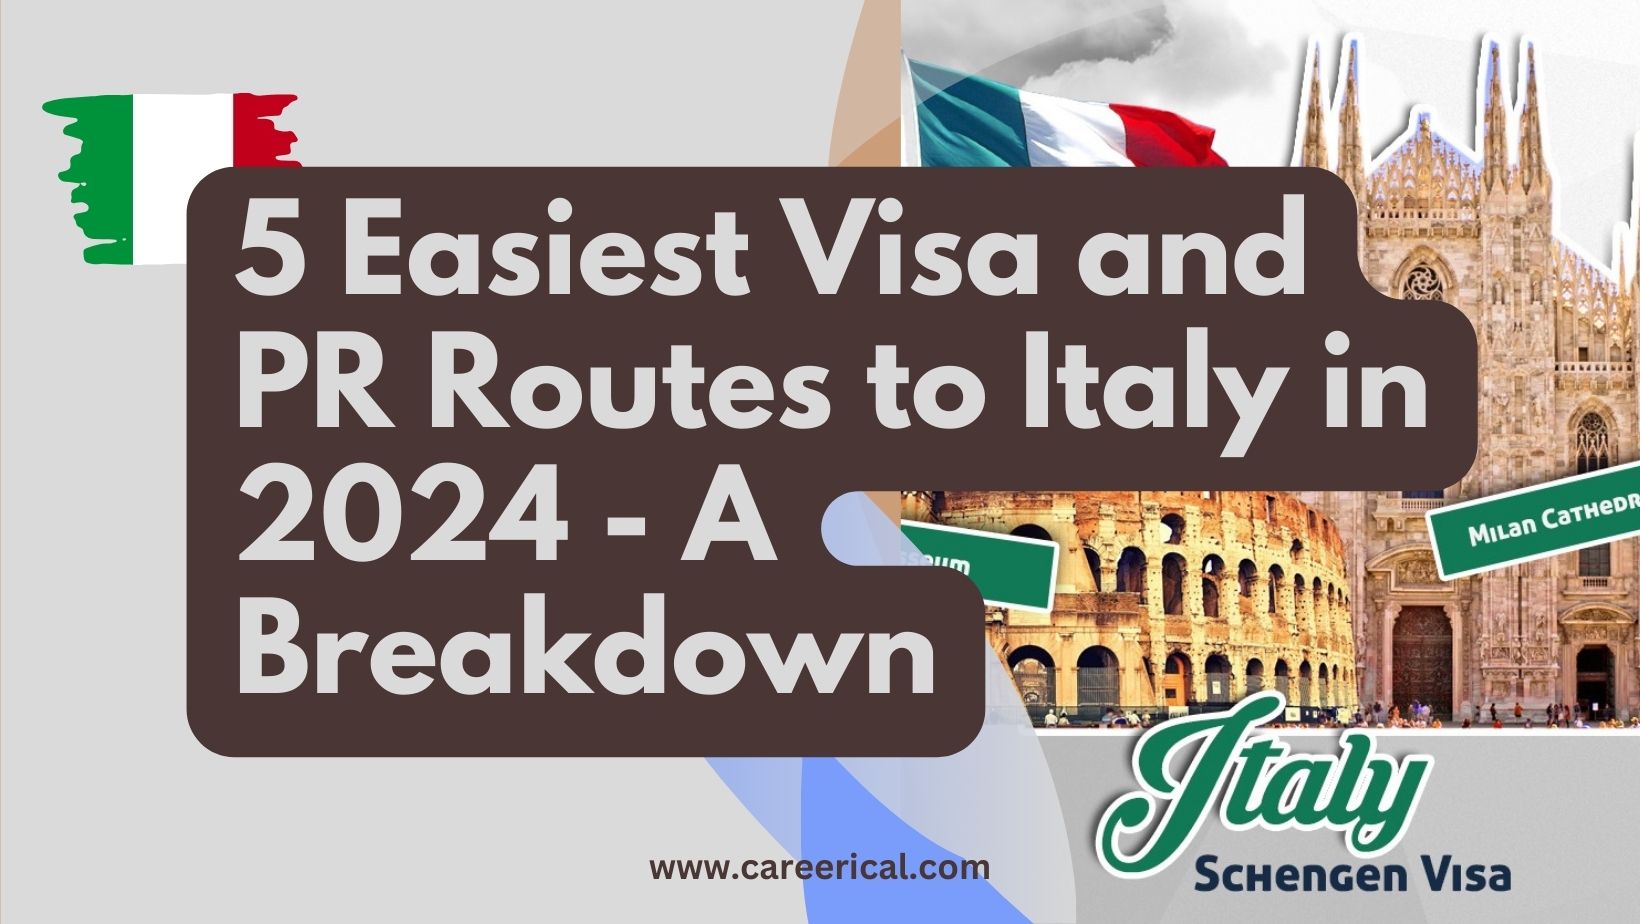 5 Easiest Visa and PR Routes to Italy in 2024 - A Breakdown